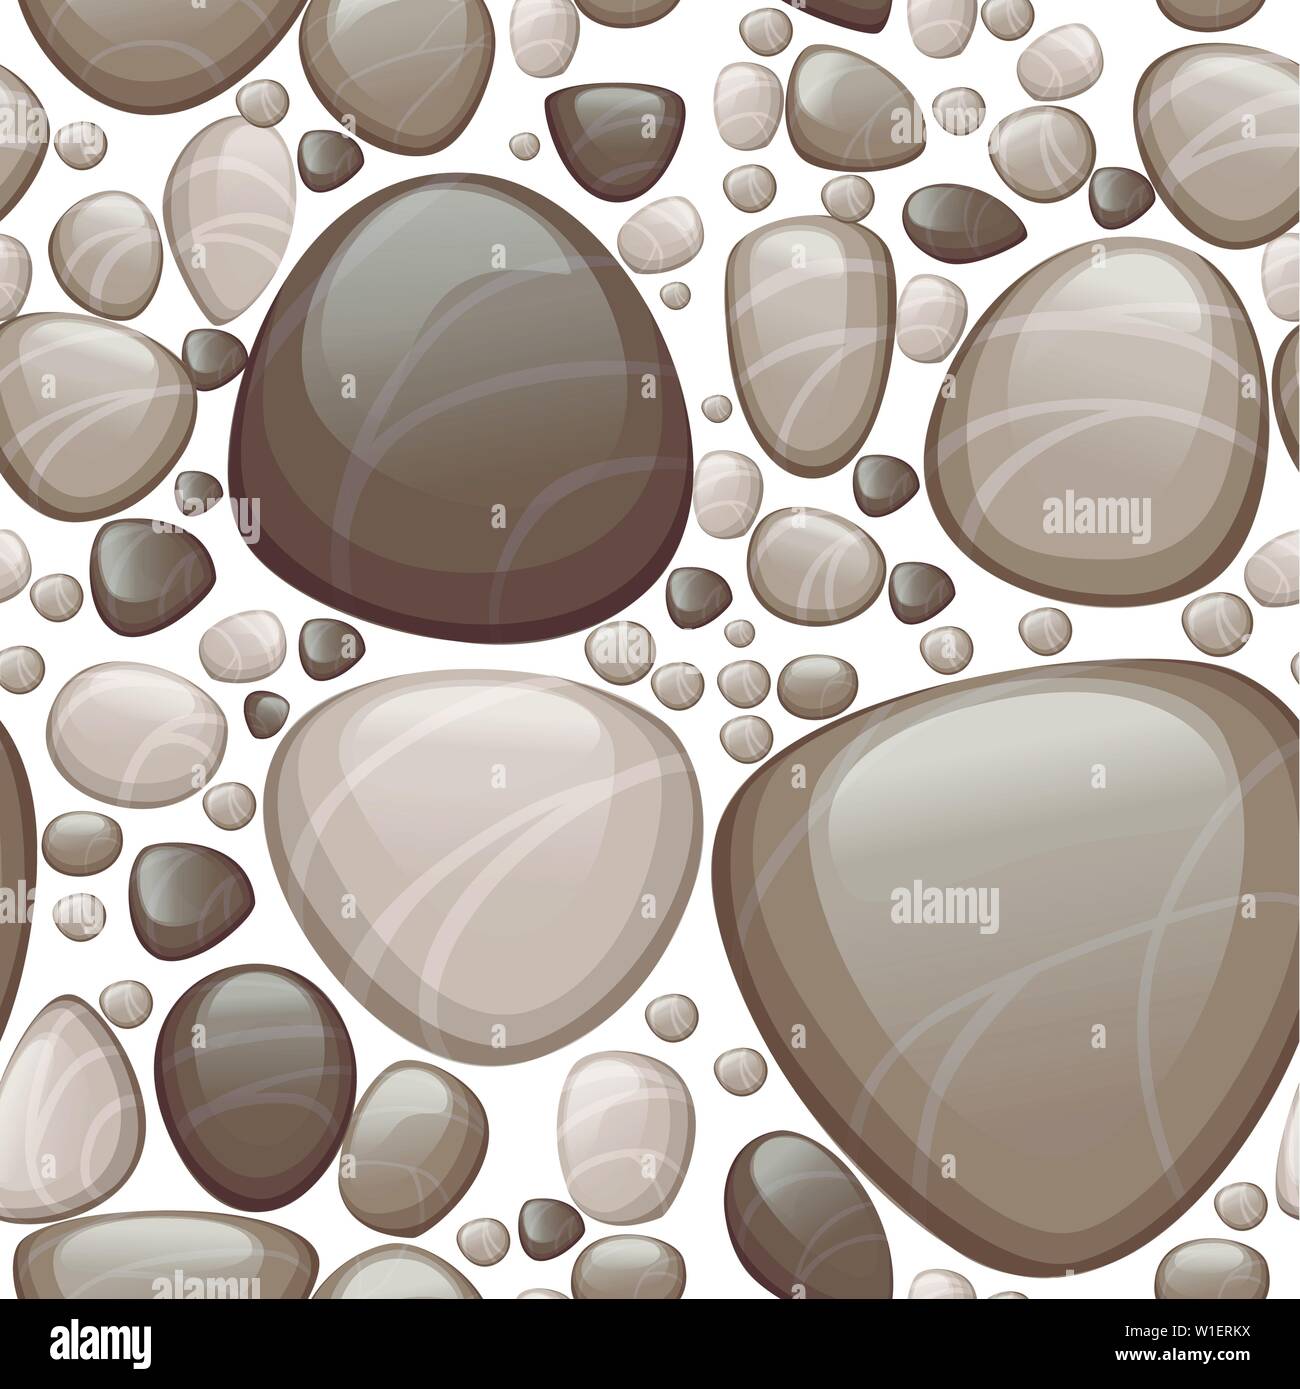 Seamless pattern of smooth stones or pebbles flat vector illustration on white background. Stock Vector